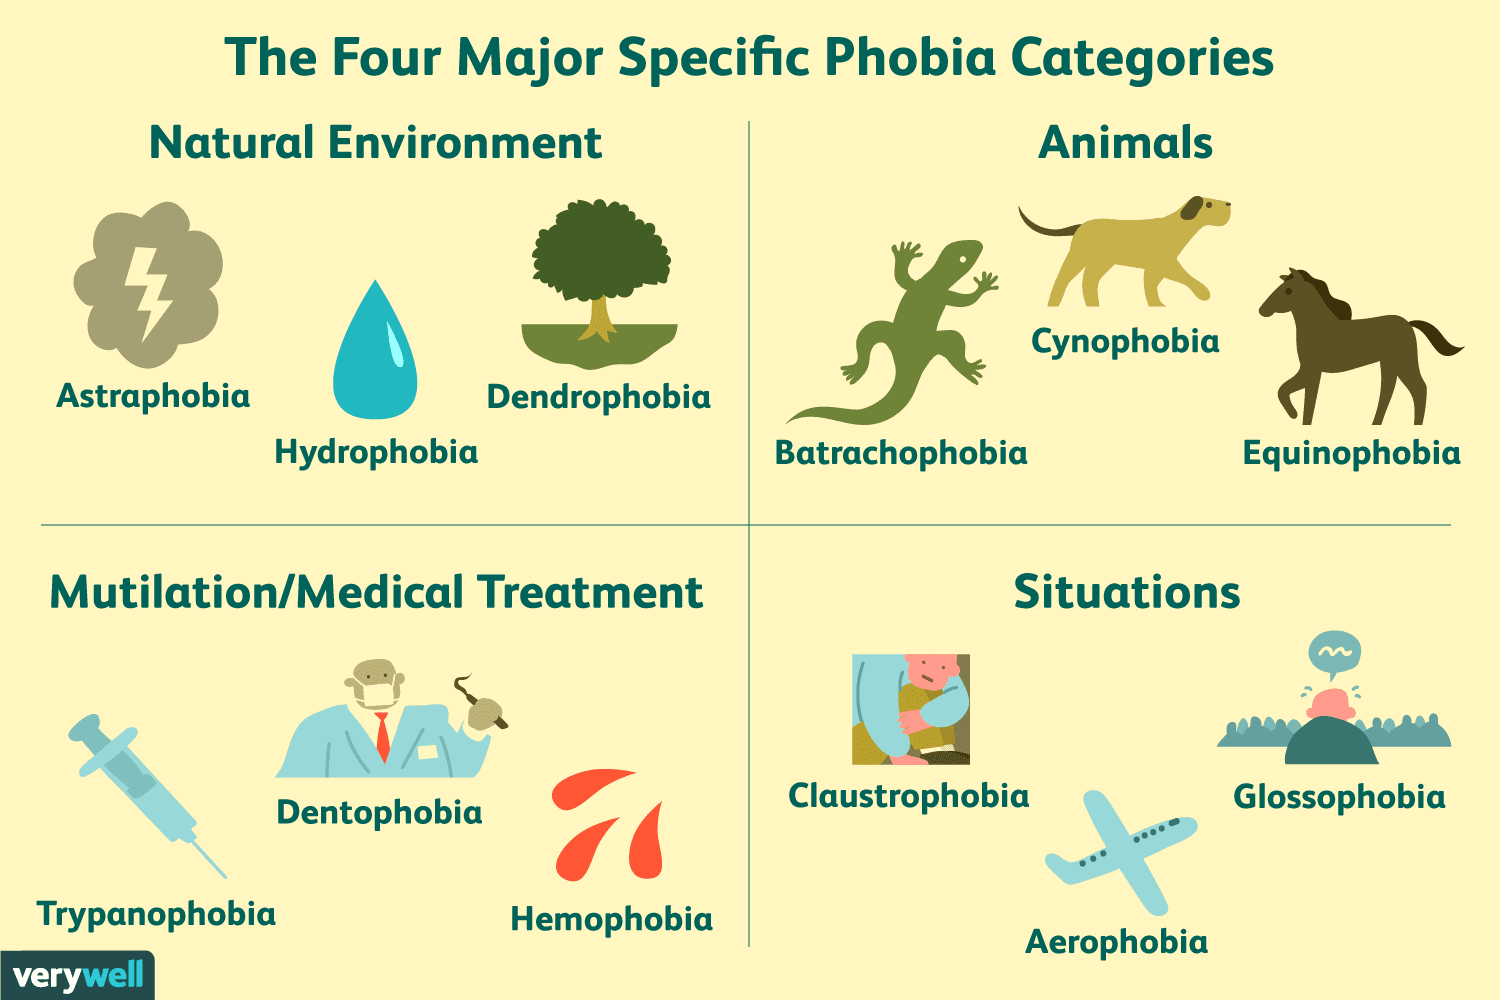 Can Ho’oponopono Be Used To Deal With Phobias?